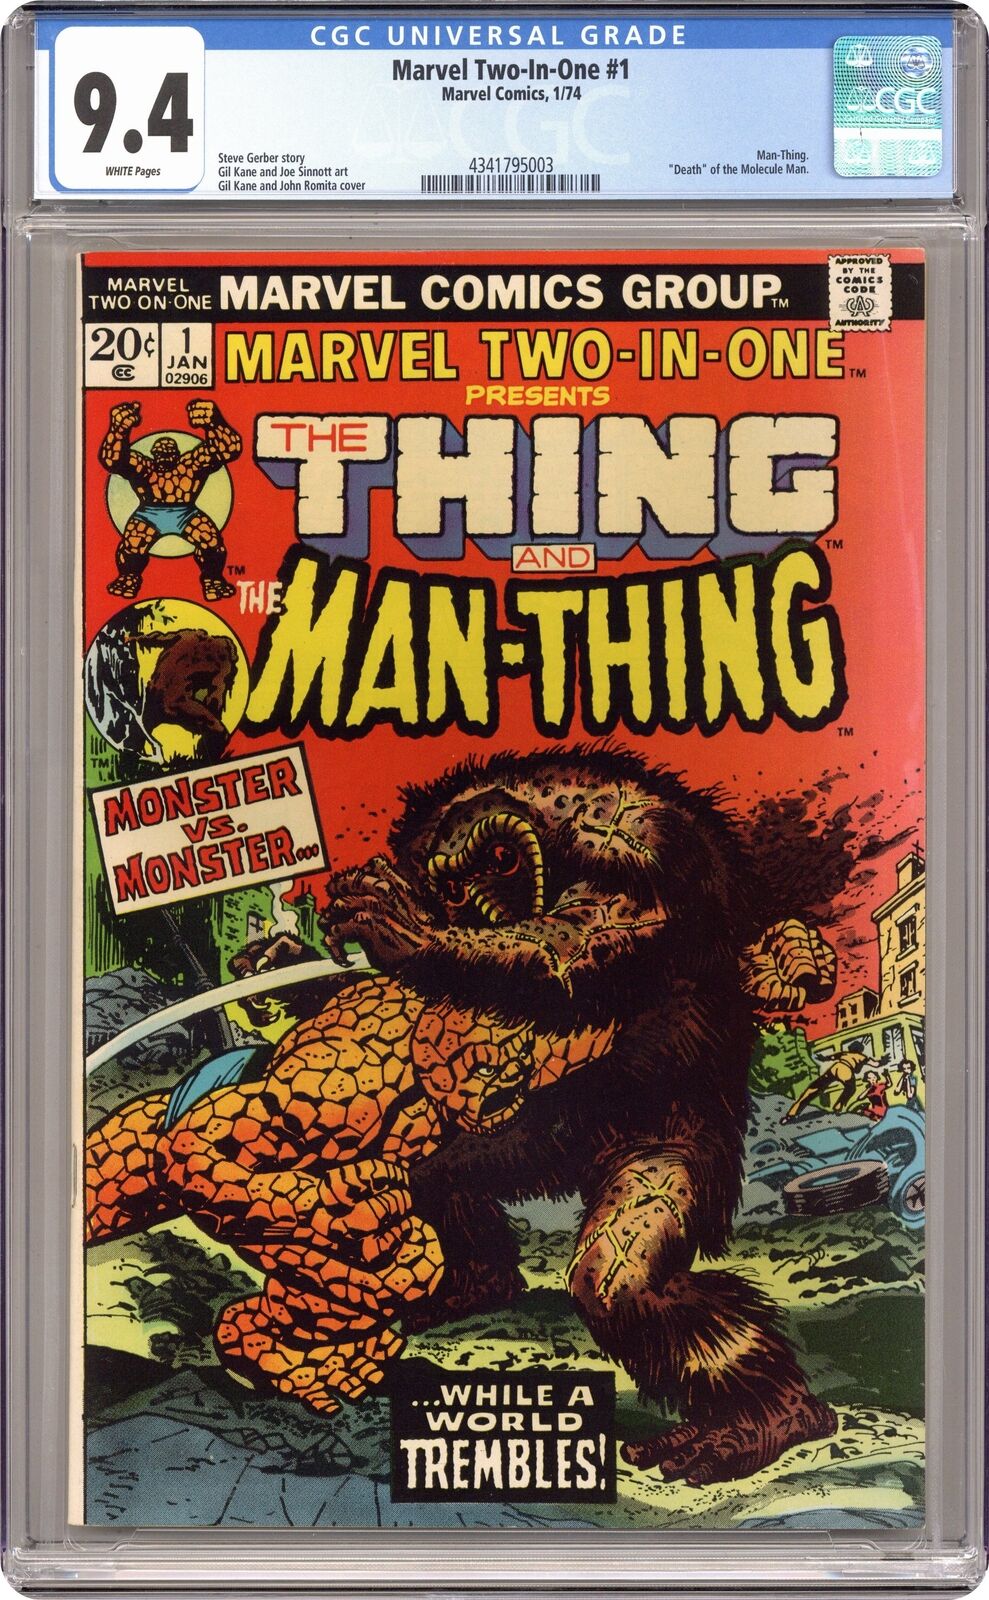 Marvel Two-in-One #1 CGC 9.4 1974 4341795003